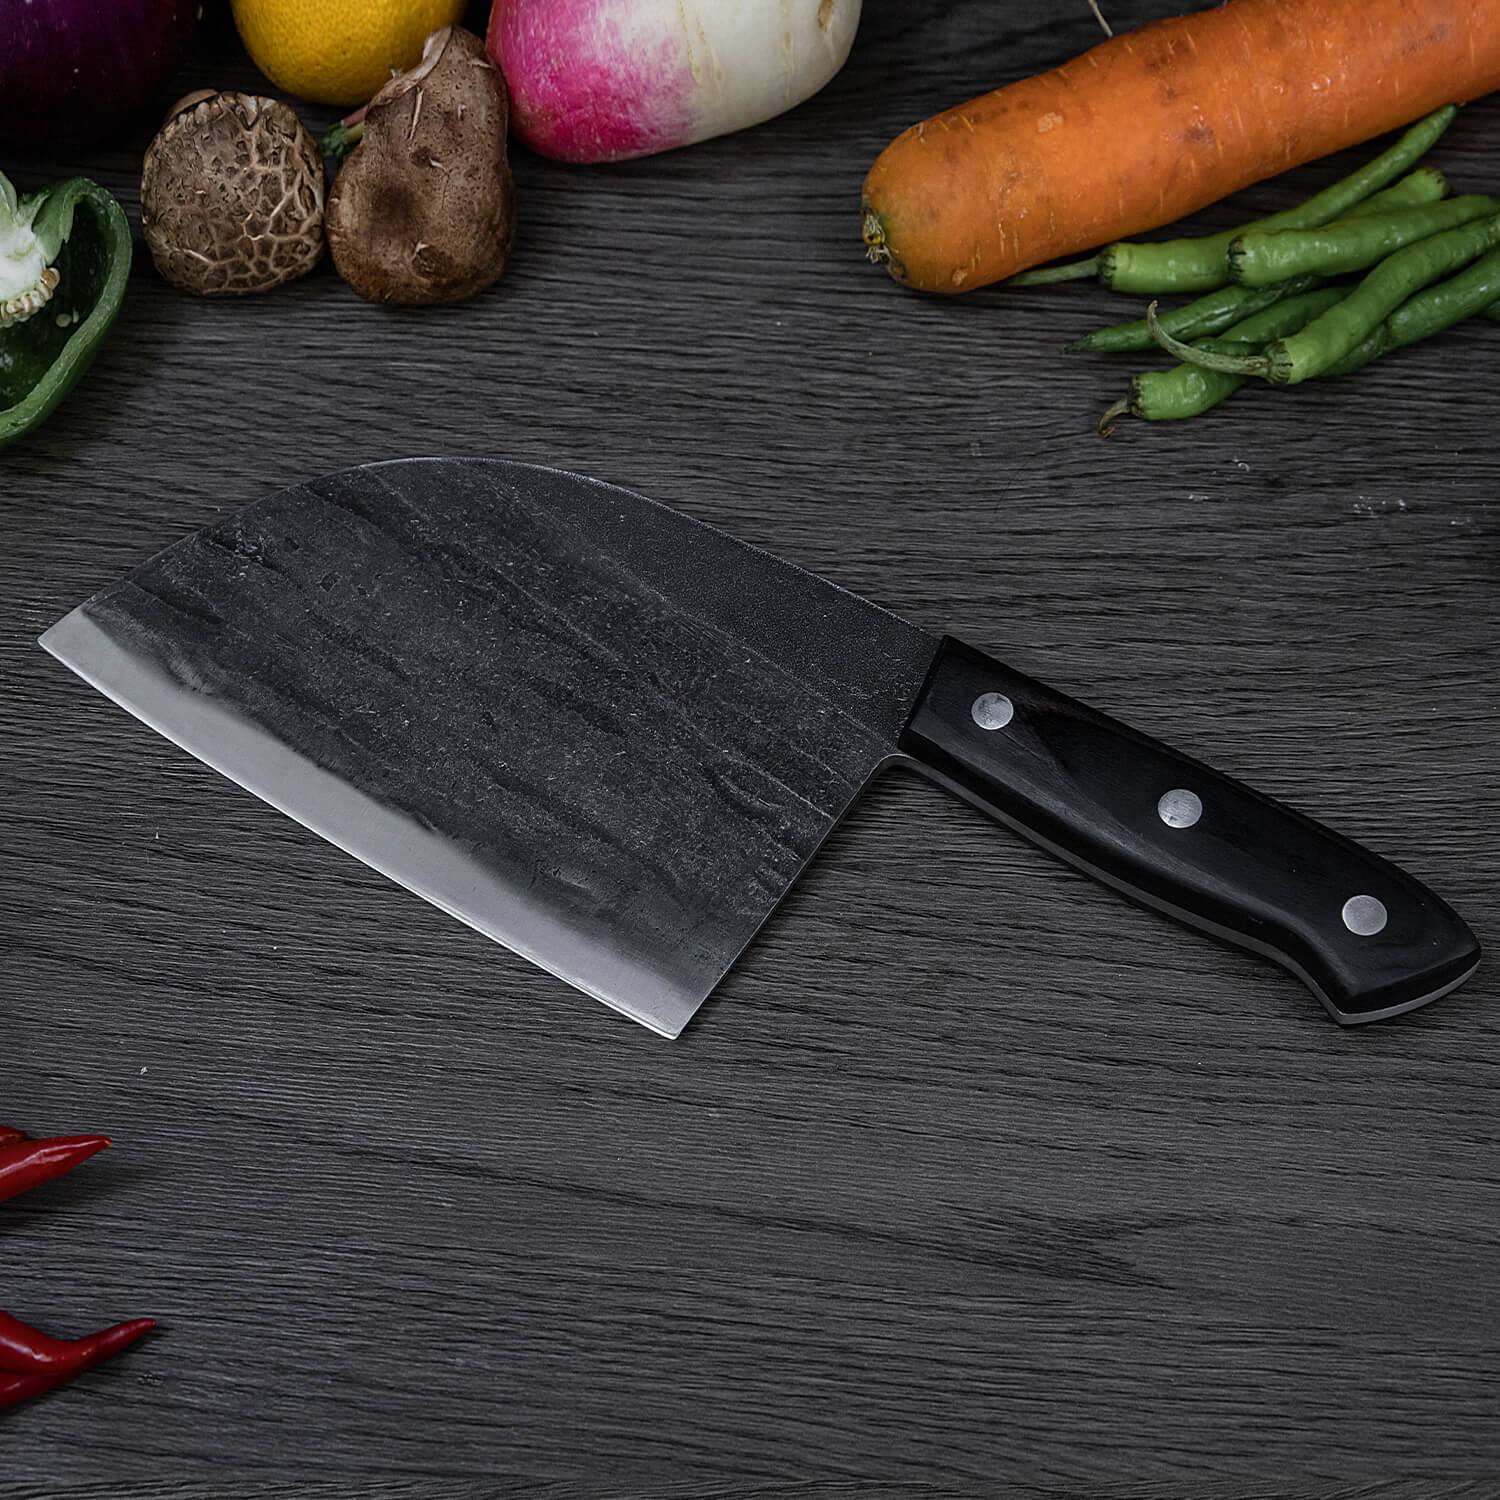 Behold the Seido Knives' Serbian Cleaver Knife, elegantly placed on a table alongside a medley of fresh vegetables.